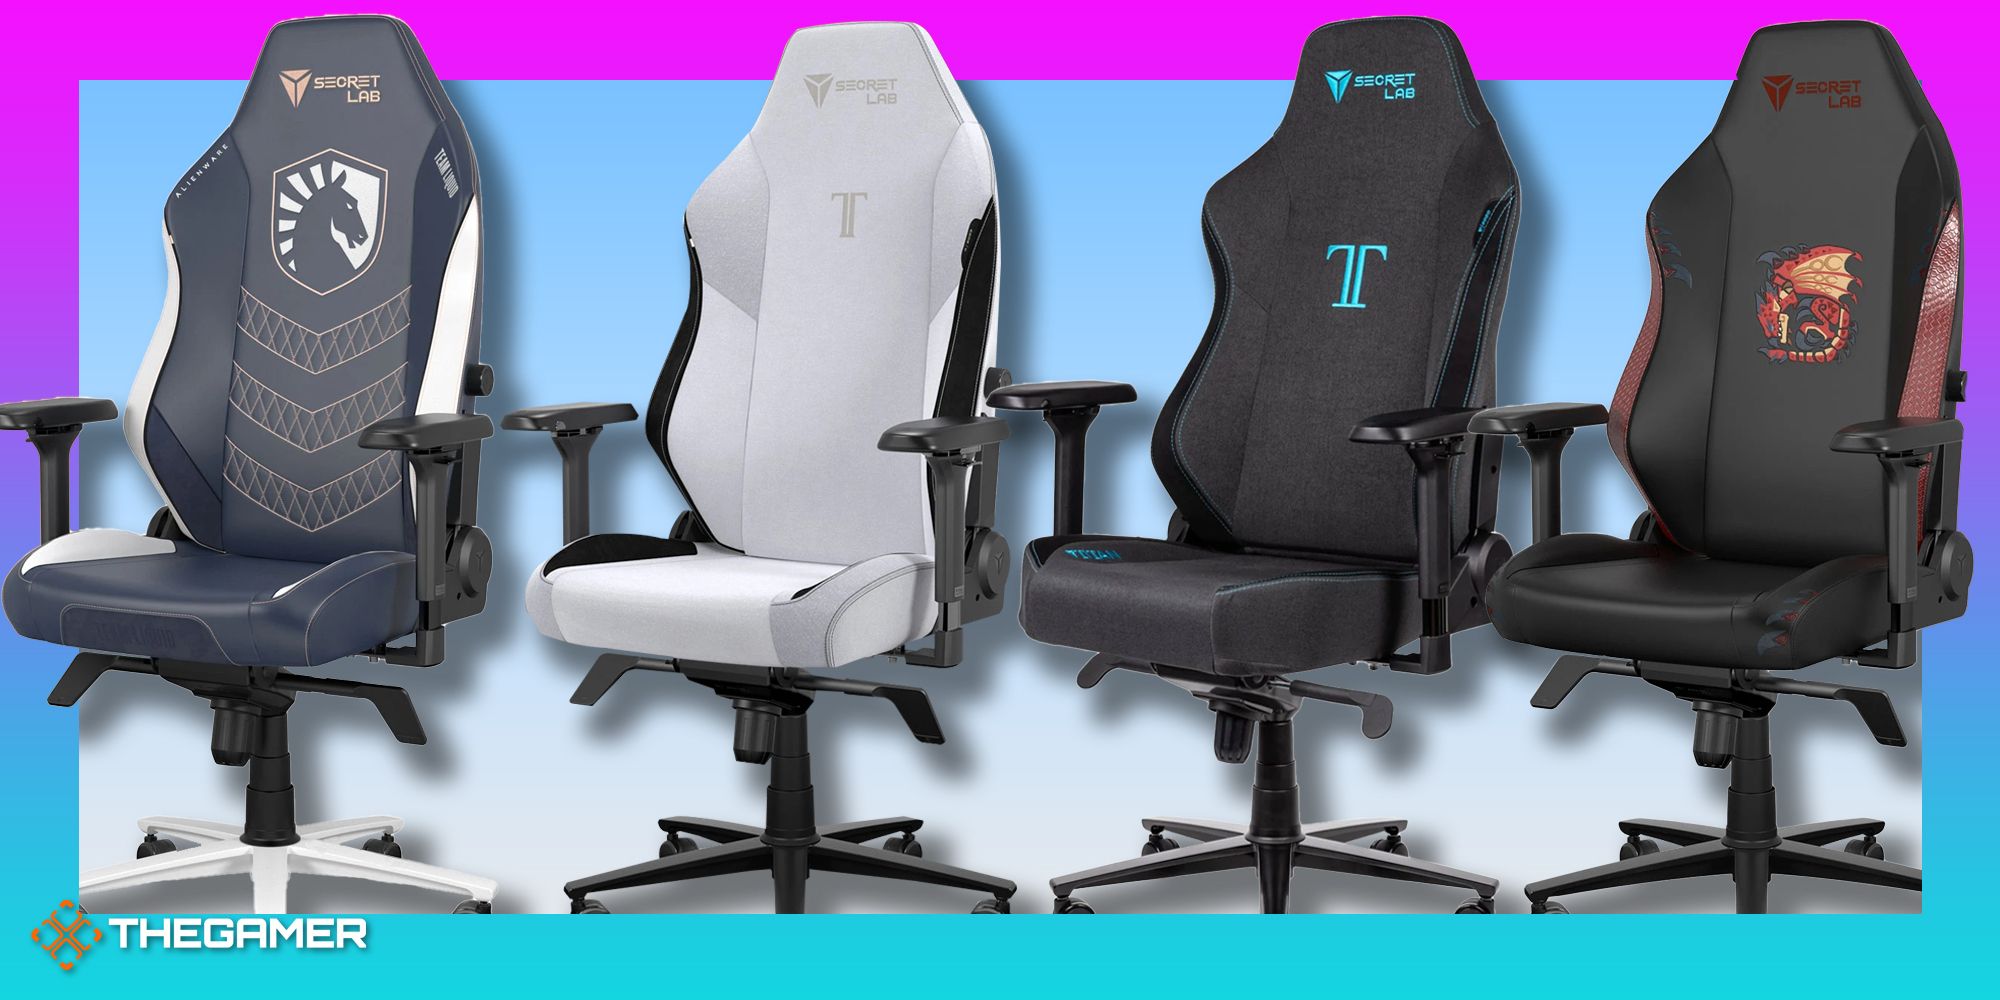 Best Secretlab Chair Deals In The Black Friday And Cyber Monday Sale